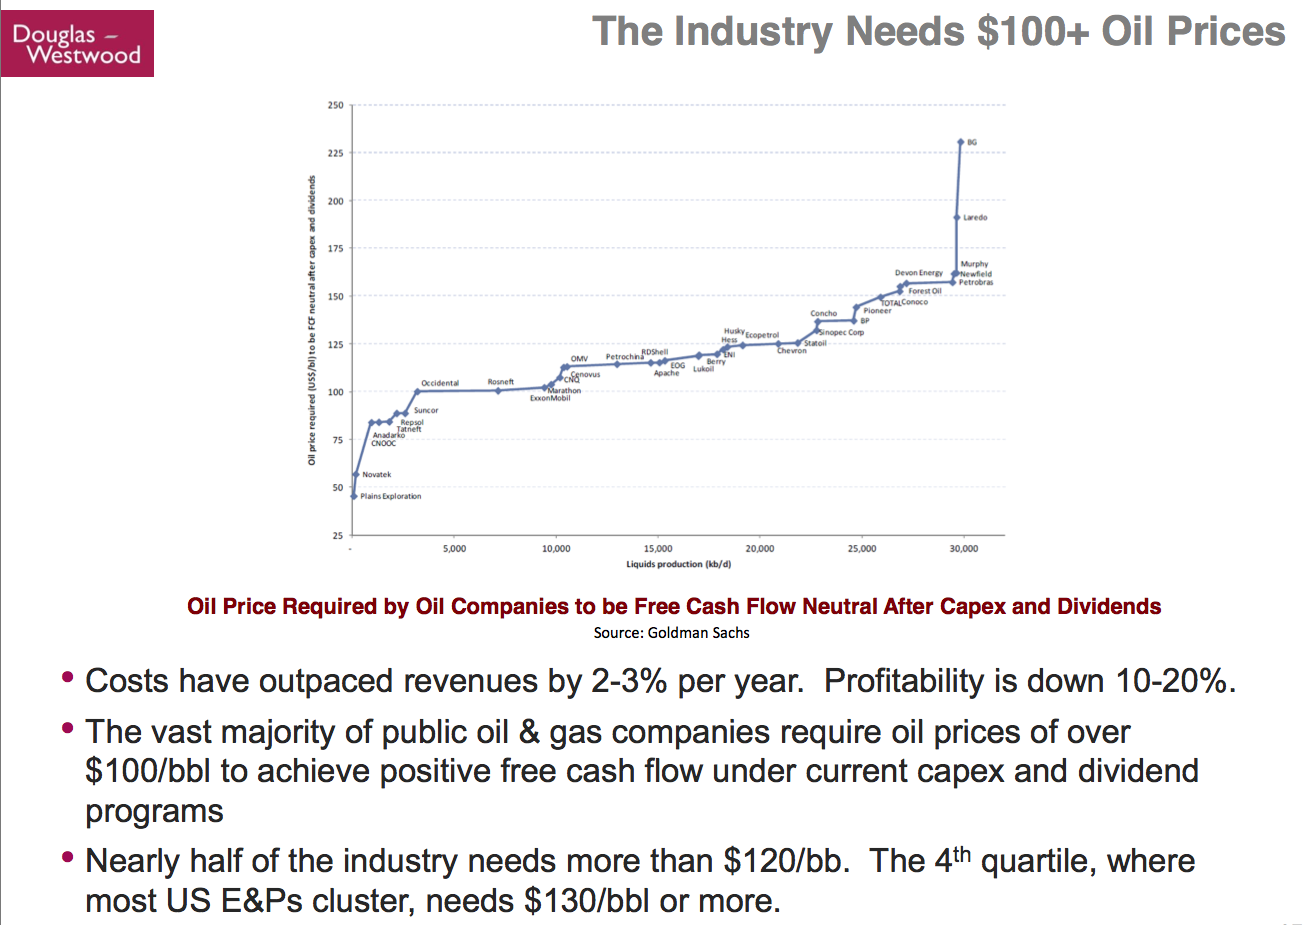 kopits-45-industry-needs-oil-prices-over-100.png